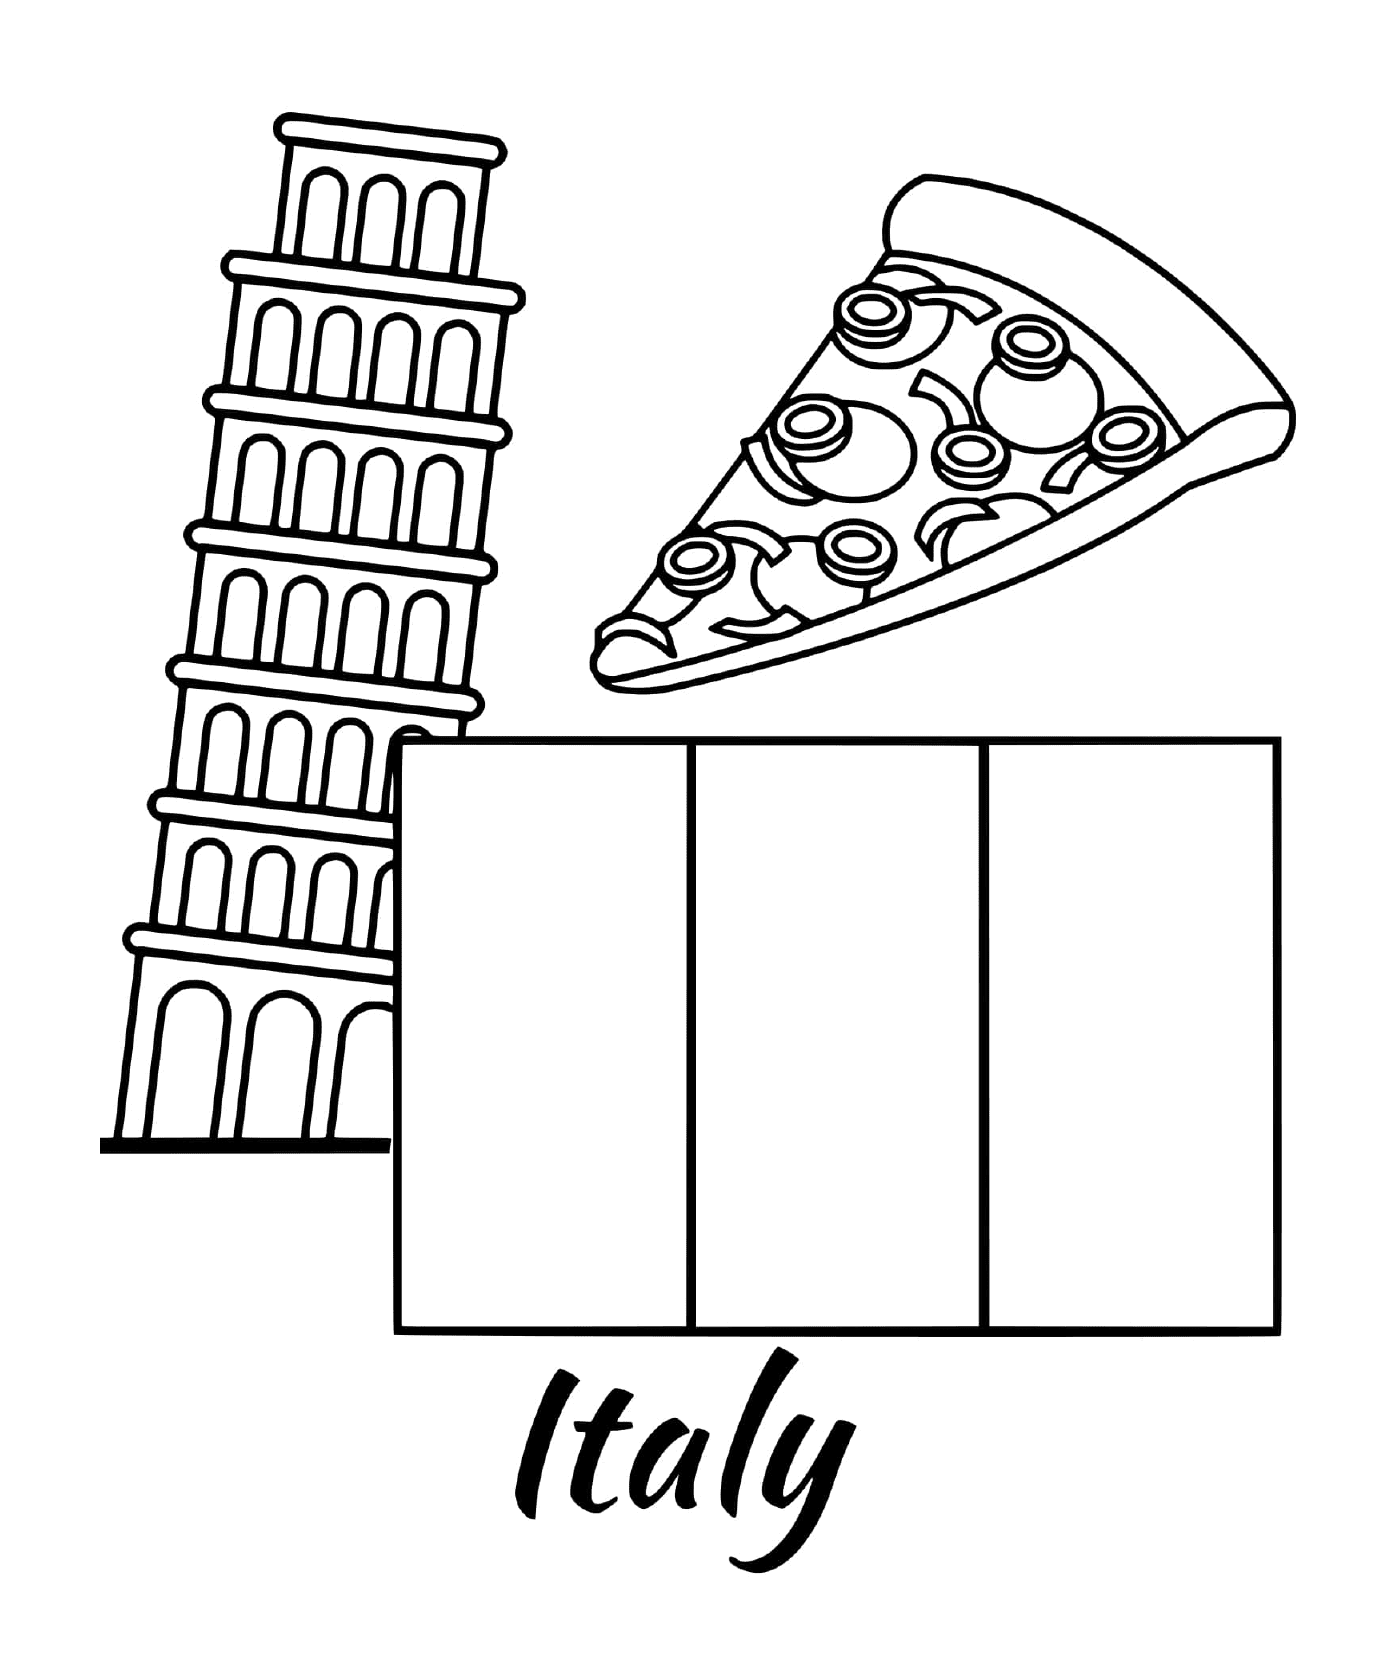  Flag of Italy with pizza 